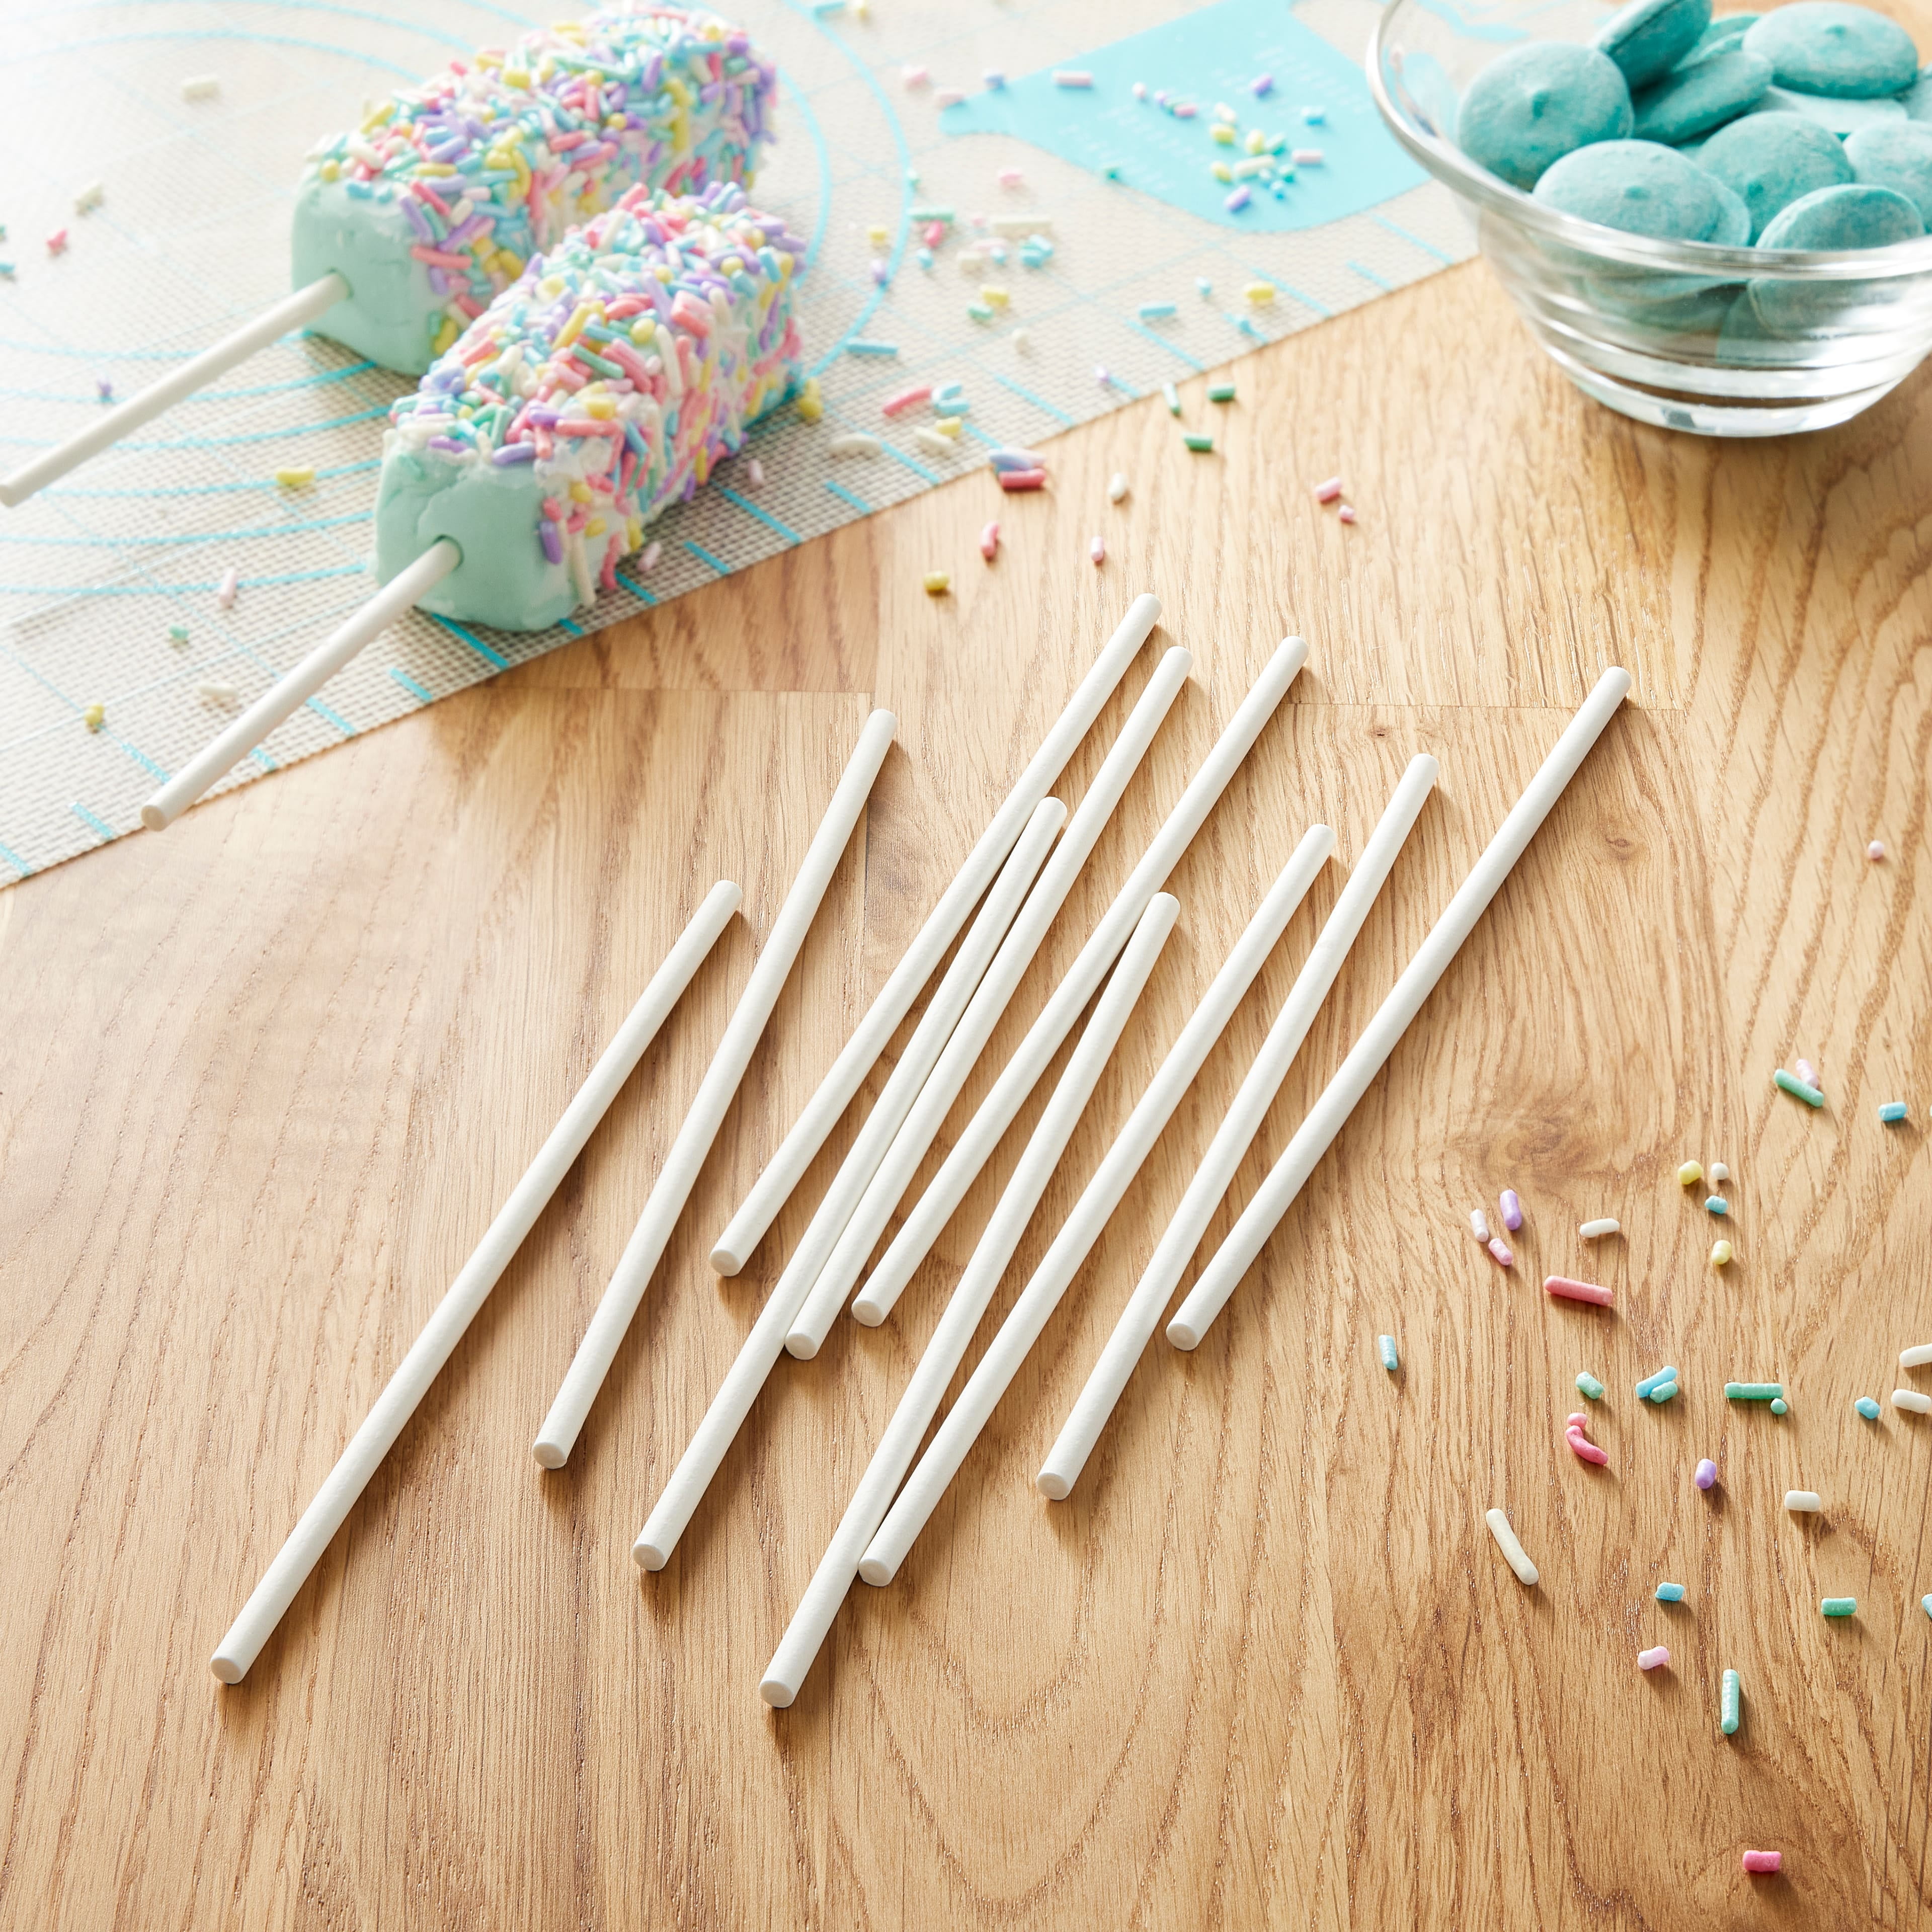 12 Packs: 6 ct. (72 total) Reusable Popsicle Sticks by Celebrate It™